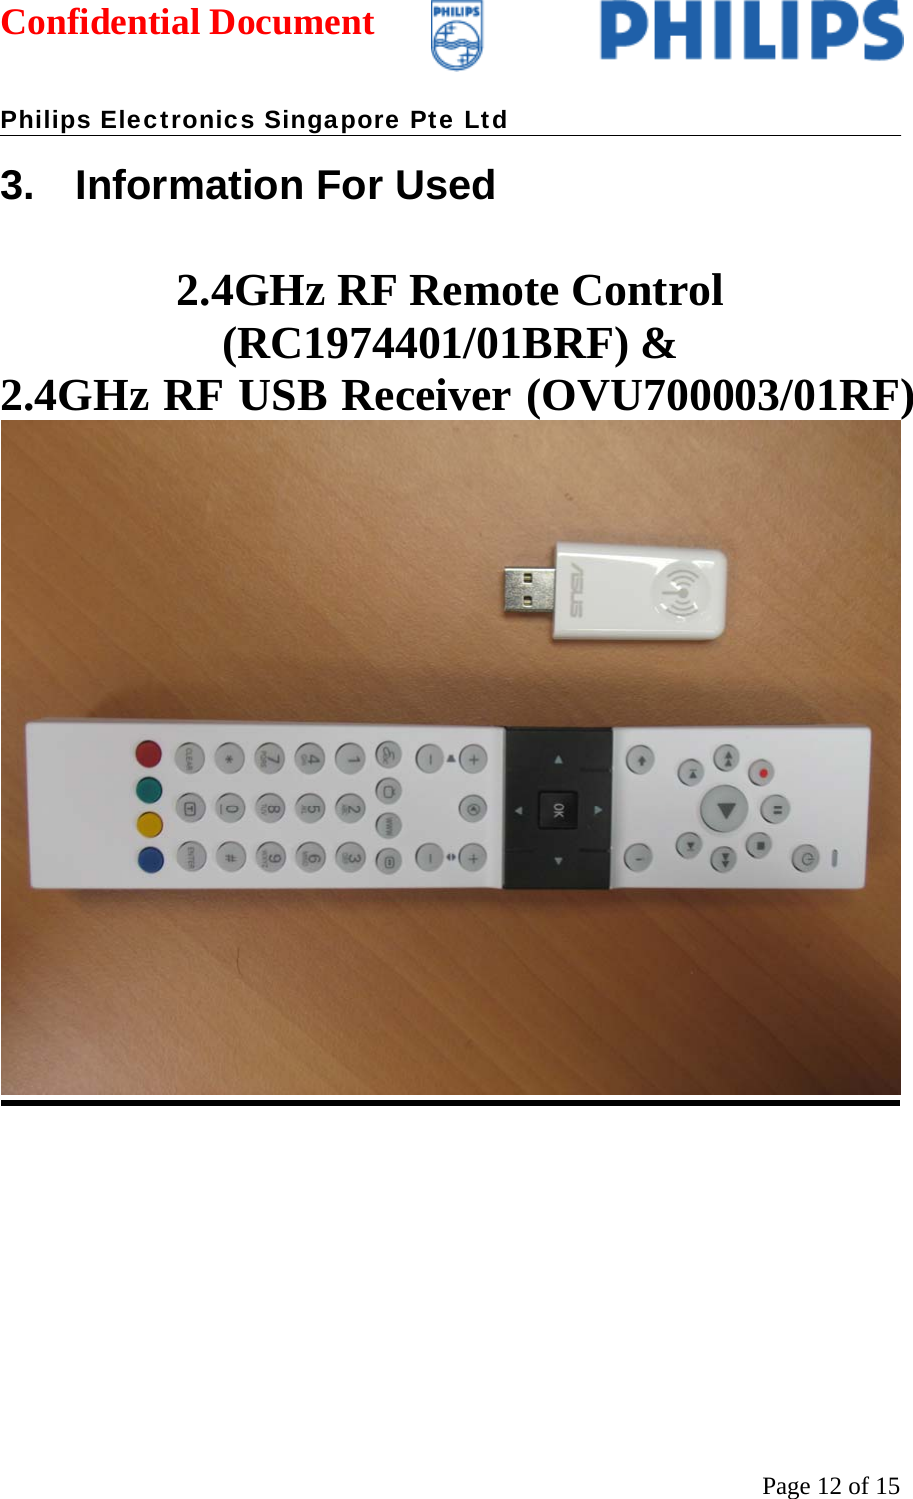 Confidential Document   Philips Electronics Singapore Pte Ltd  Page 12 of 153. Information For Used  2.4GHz RF Remote Control (RC1974401/01BRF) &amp;  2.4GHz RF USB Receiver (OVU700003/01RF)     